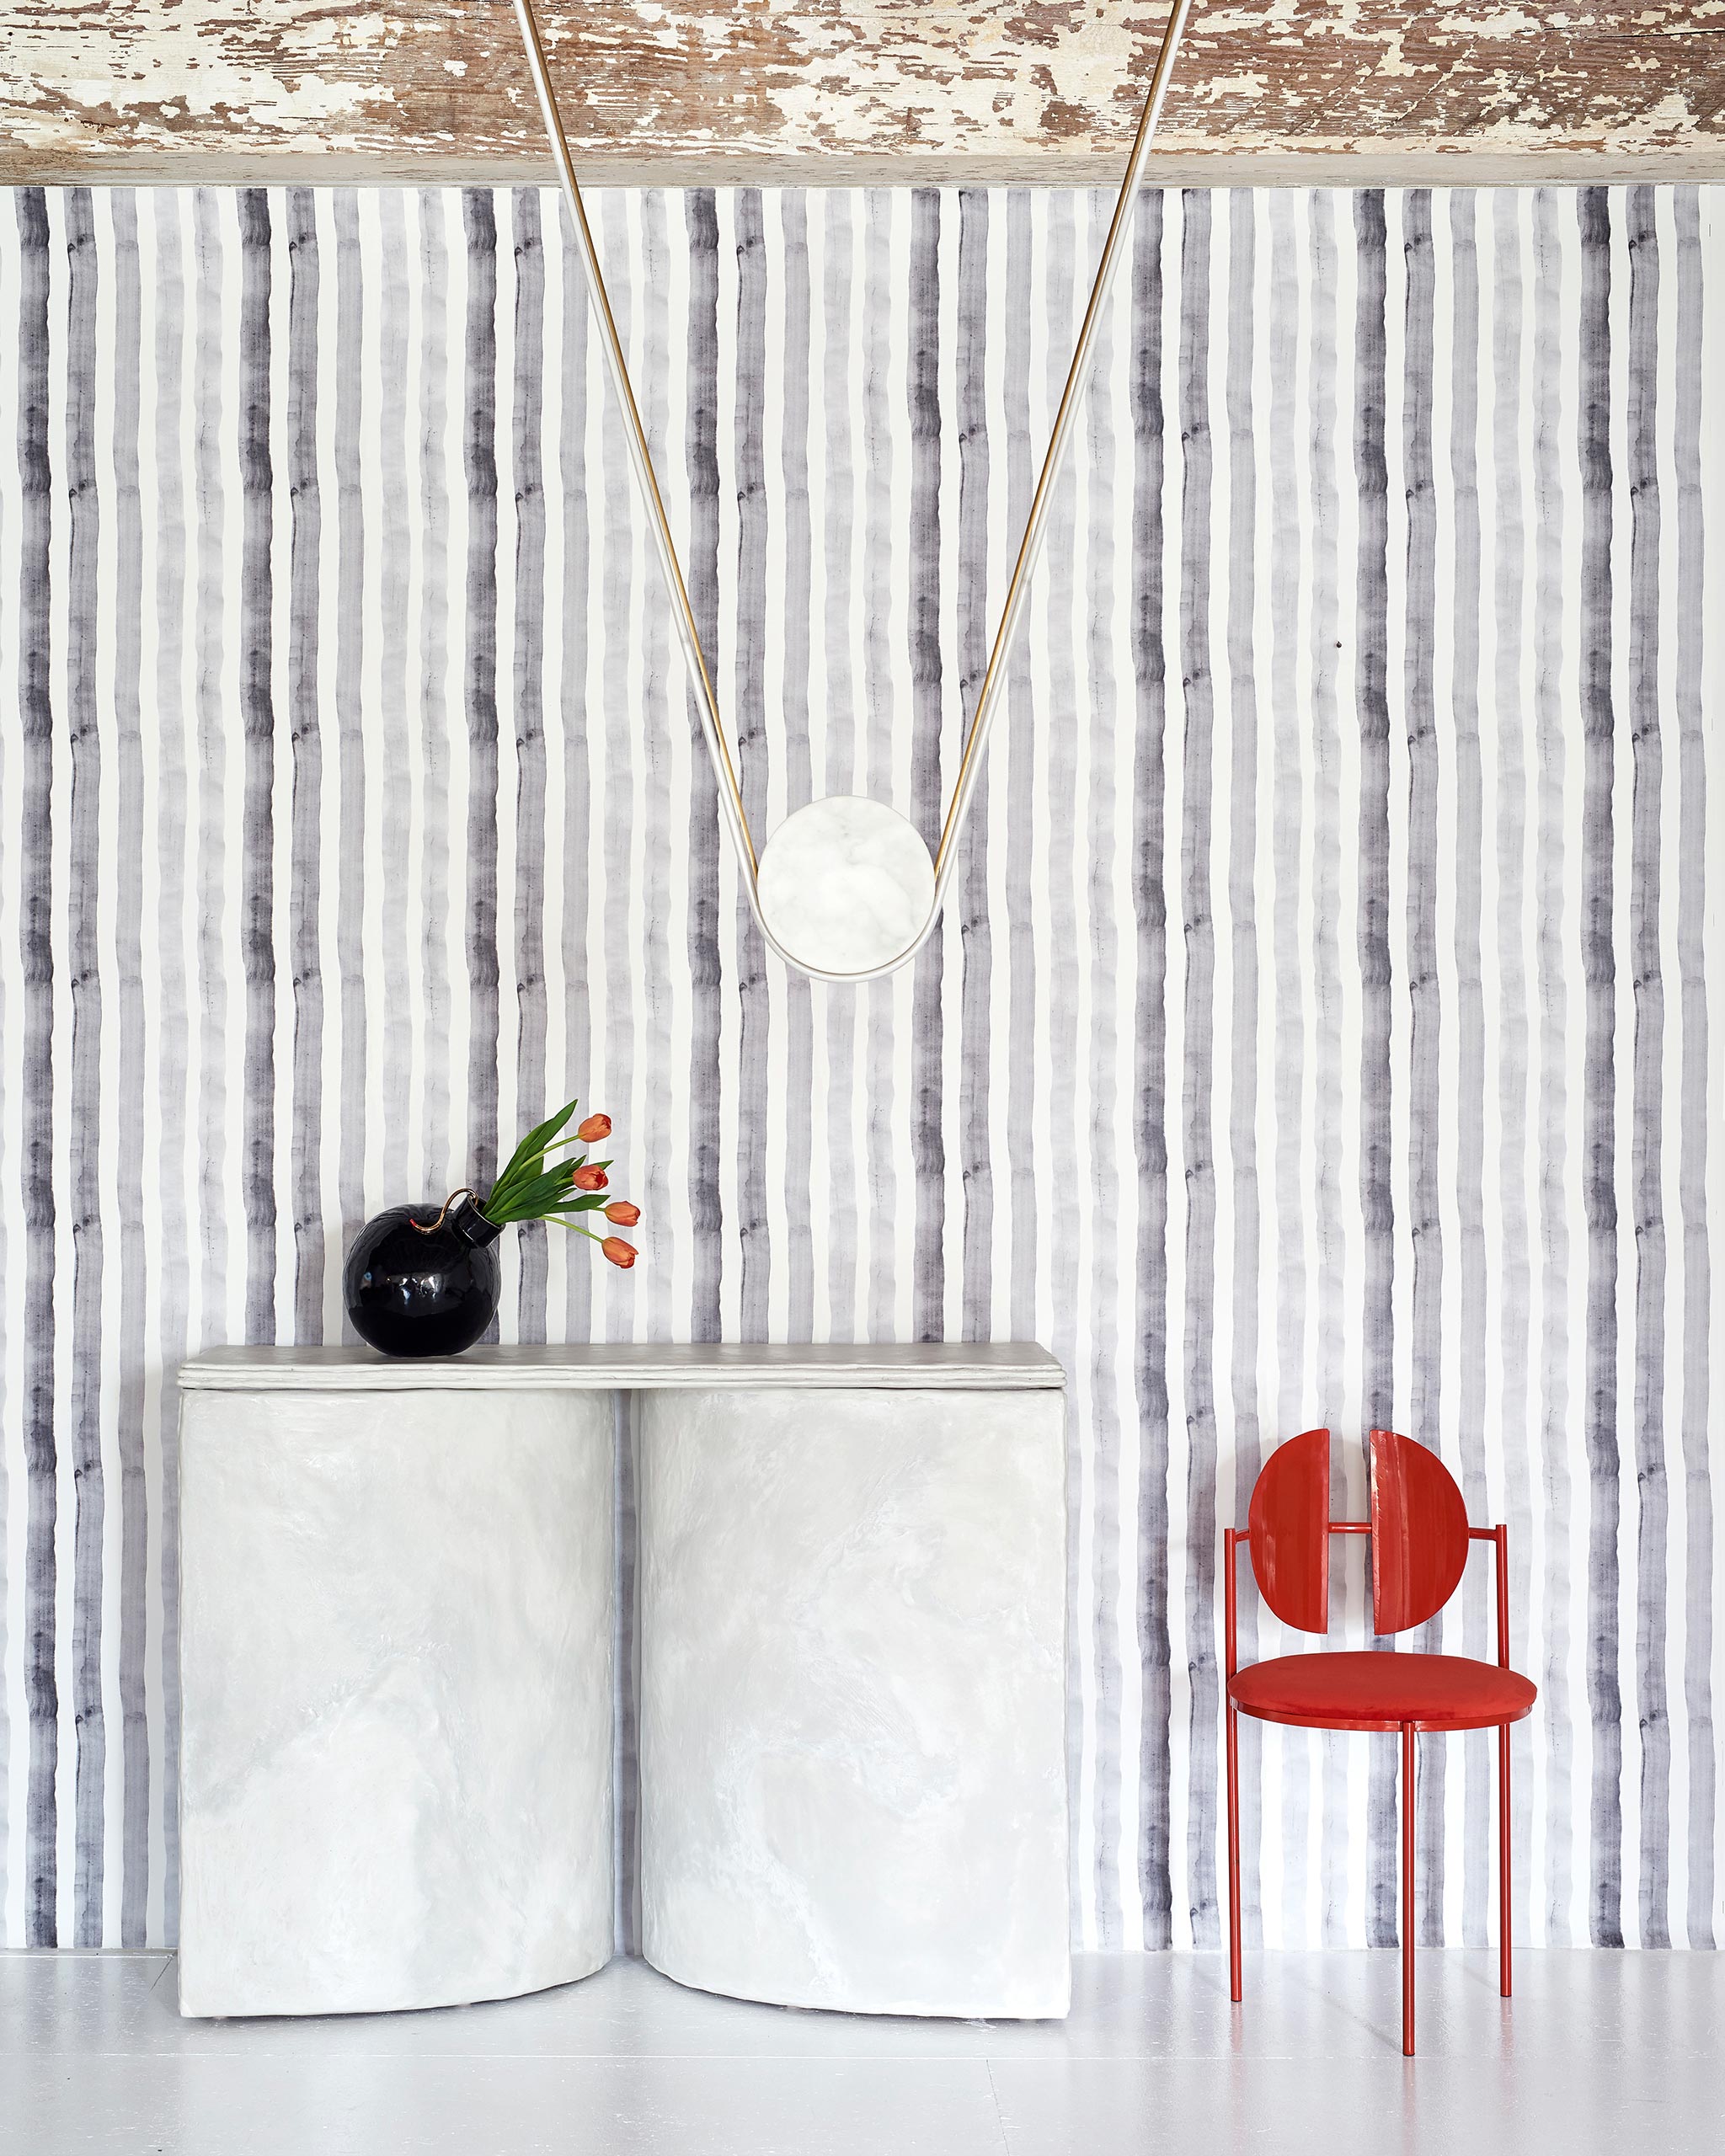 A modernist living tableau with a wall papered in a painterly stripe print in shades of gray on a white field.